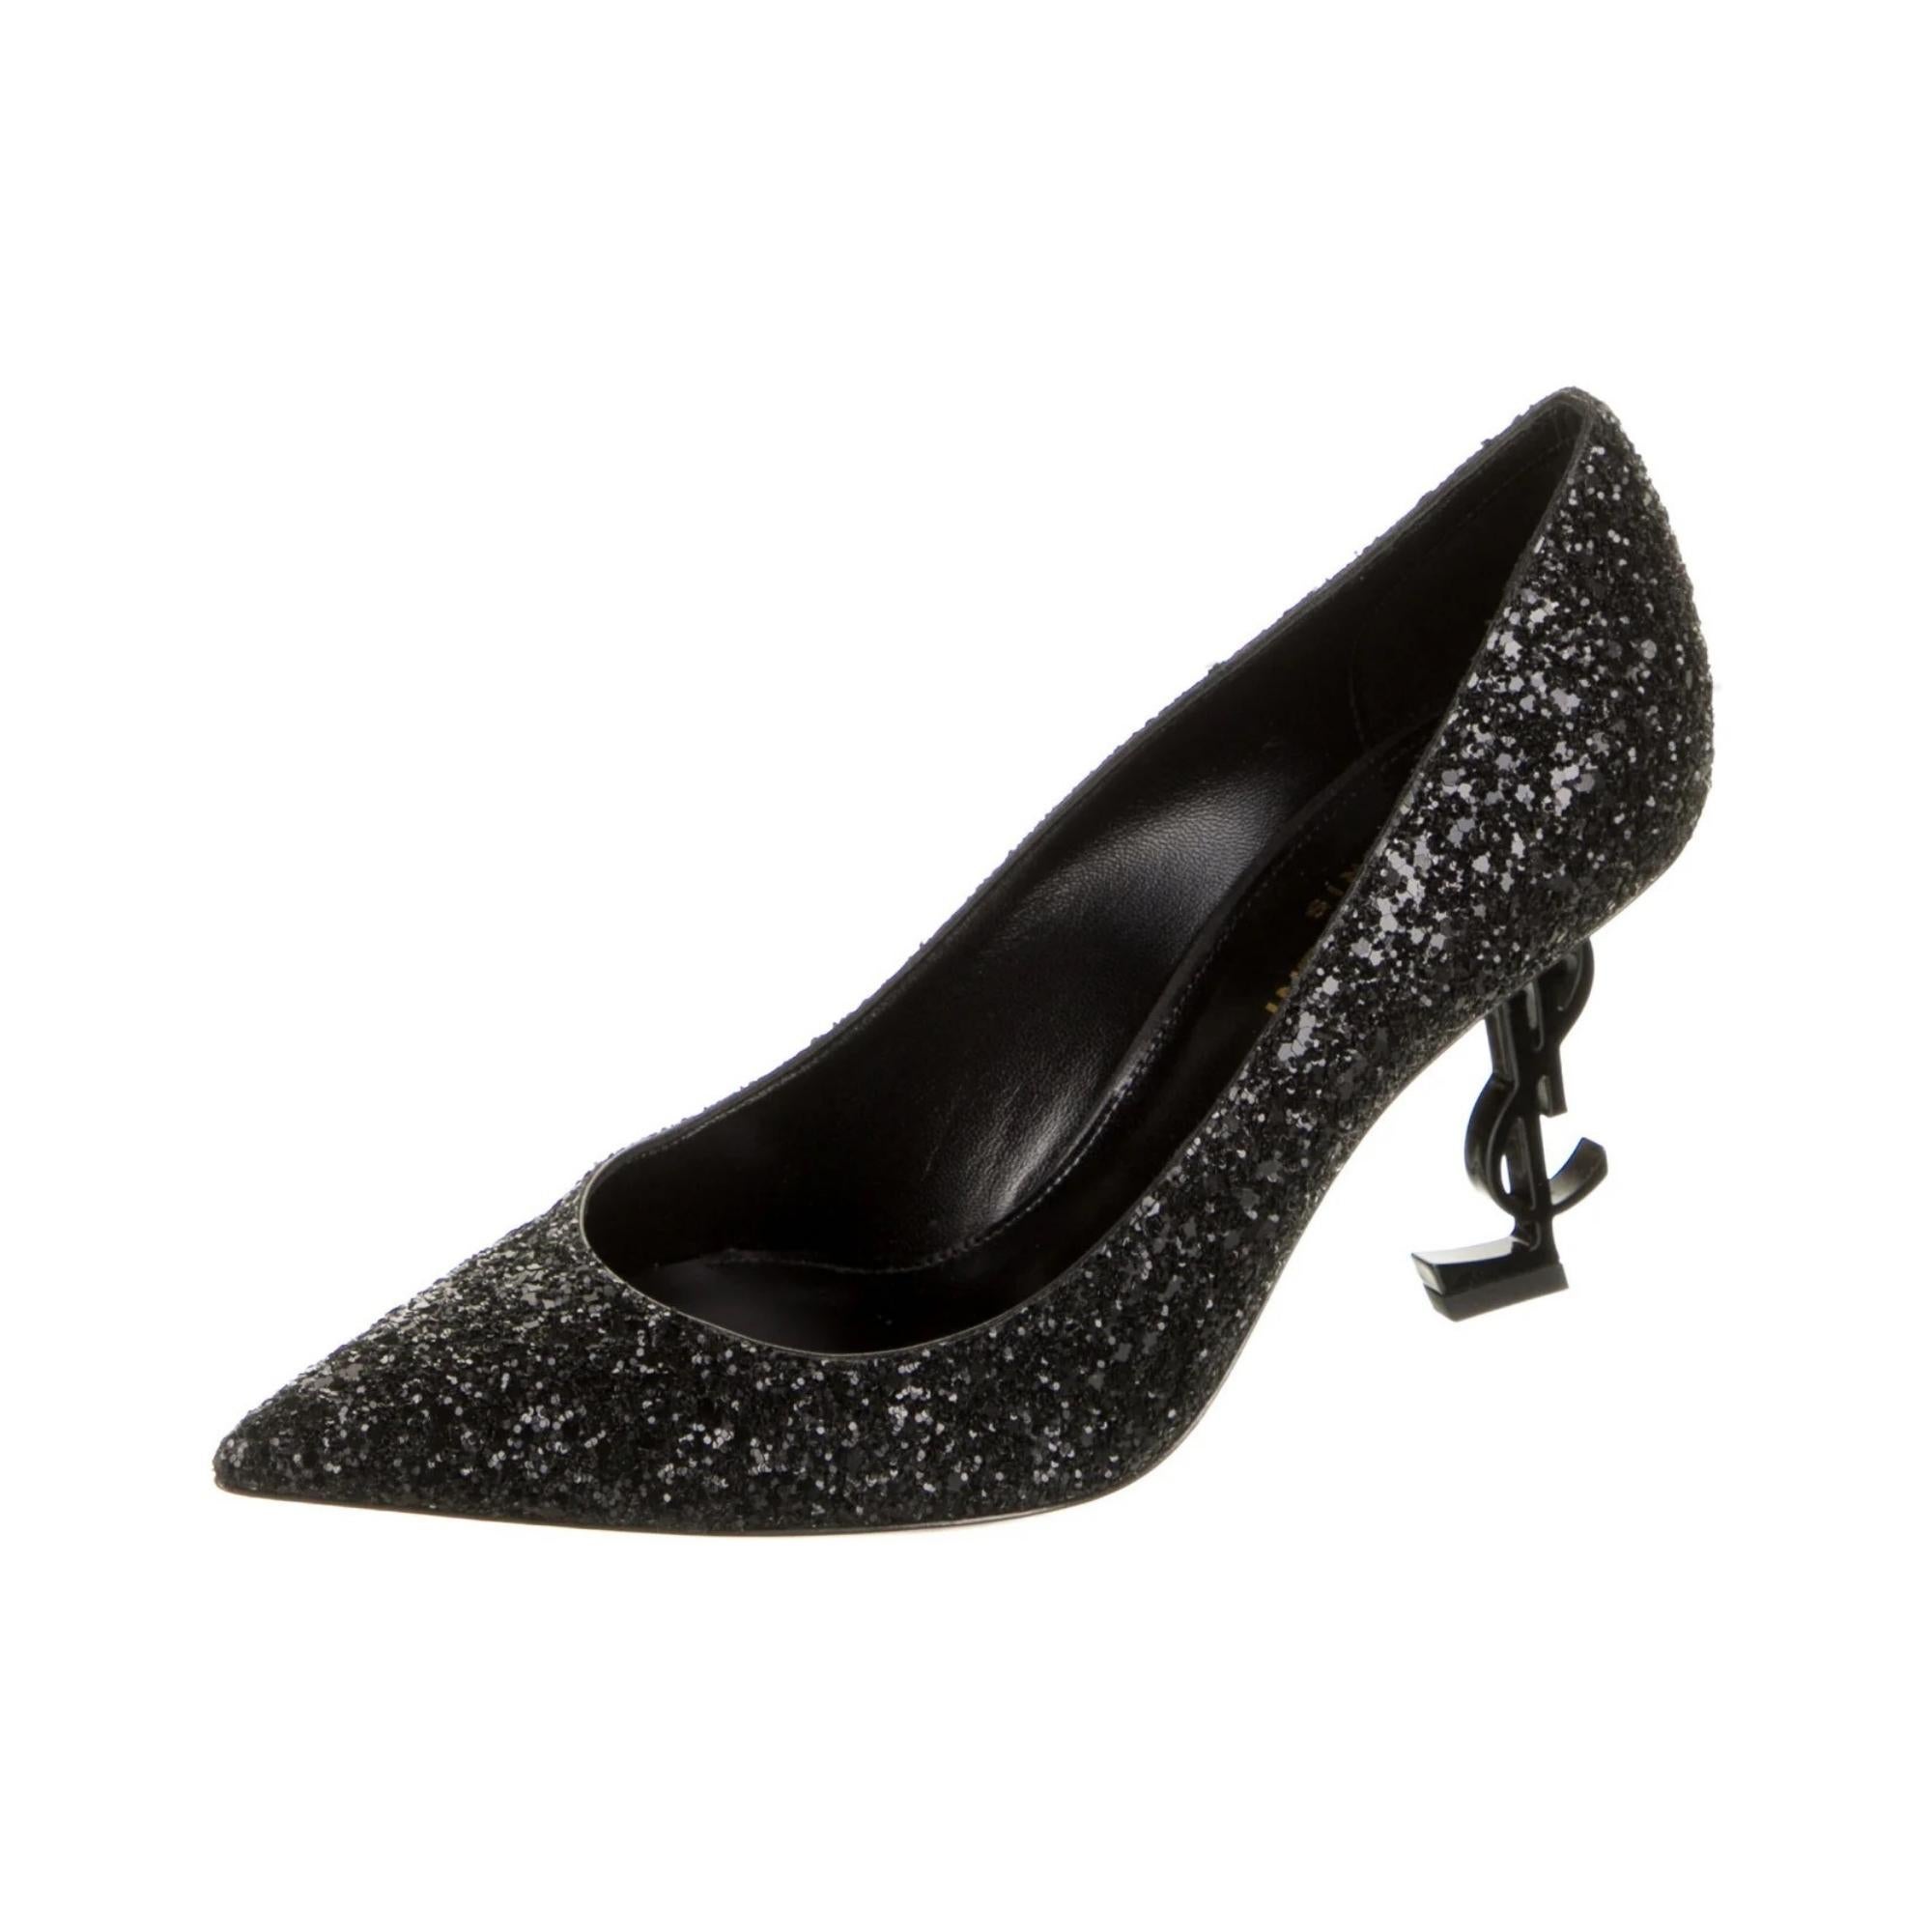 Saint Laurent pumps in black leather with glitter featuring a low cut vamp, pointed toe, leather sole and sculptural interlocking YSL heels of black metallic. This model is set on a 85 mm (3.5 inch) heels.

COLOR: Black
MATERIAL: Leather
ITEM CODE: